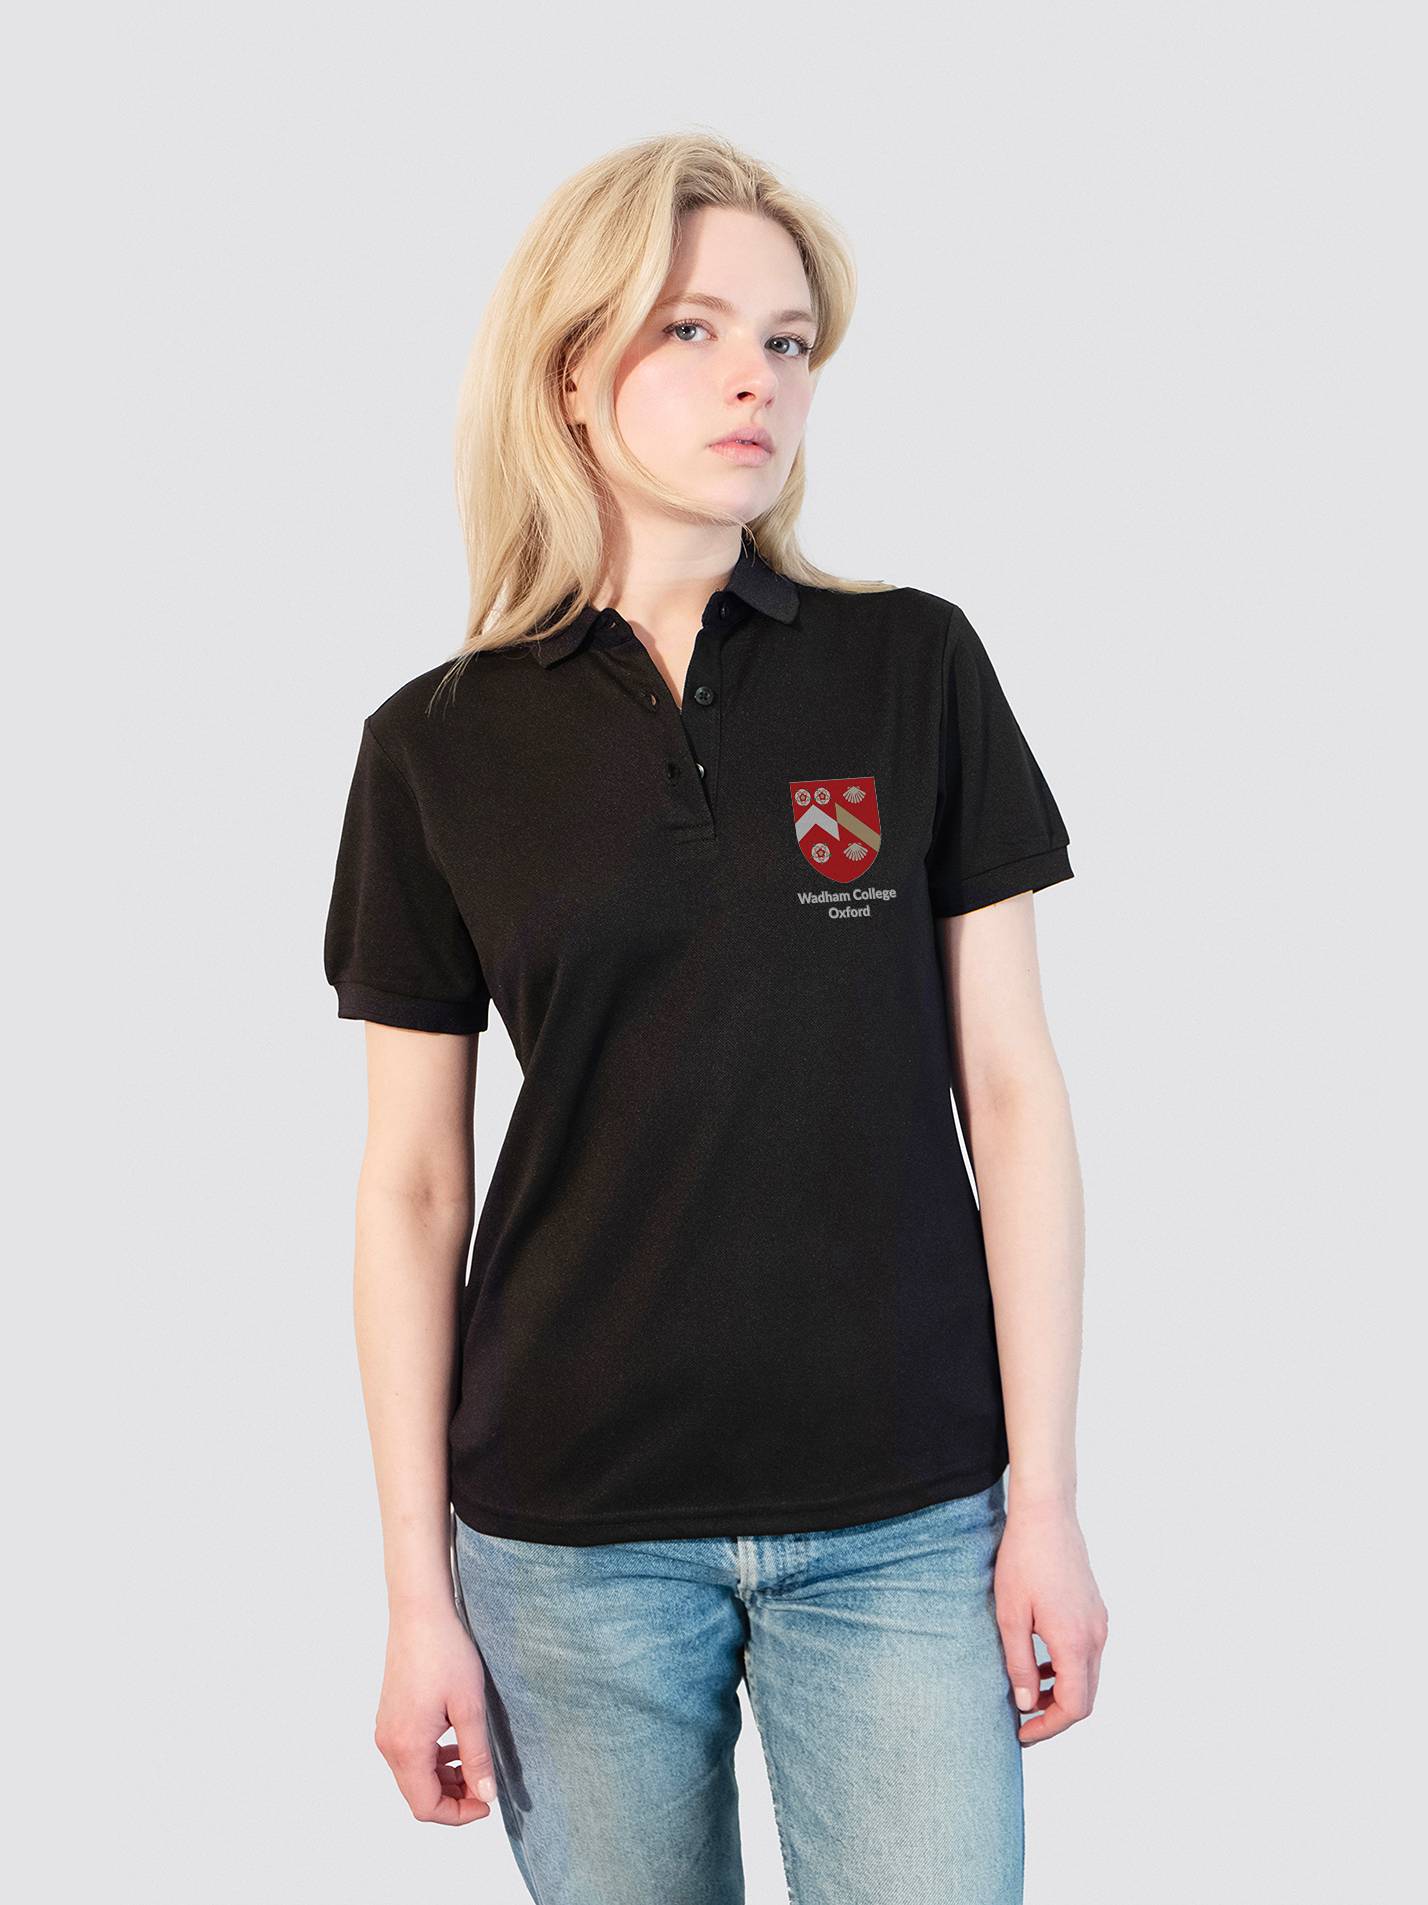 Wadham College Oxford Sustainable Ladies Polo Shirt